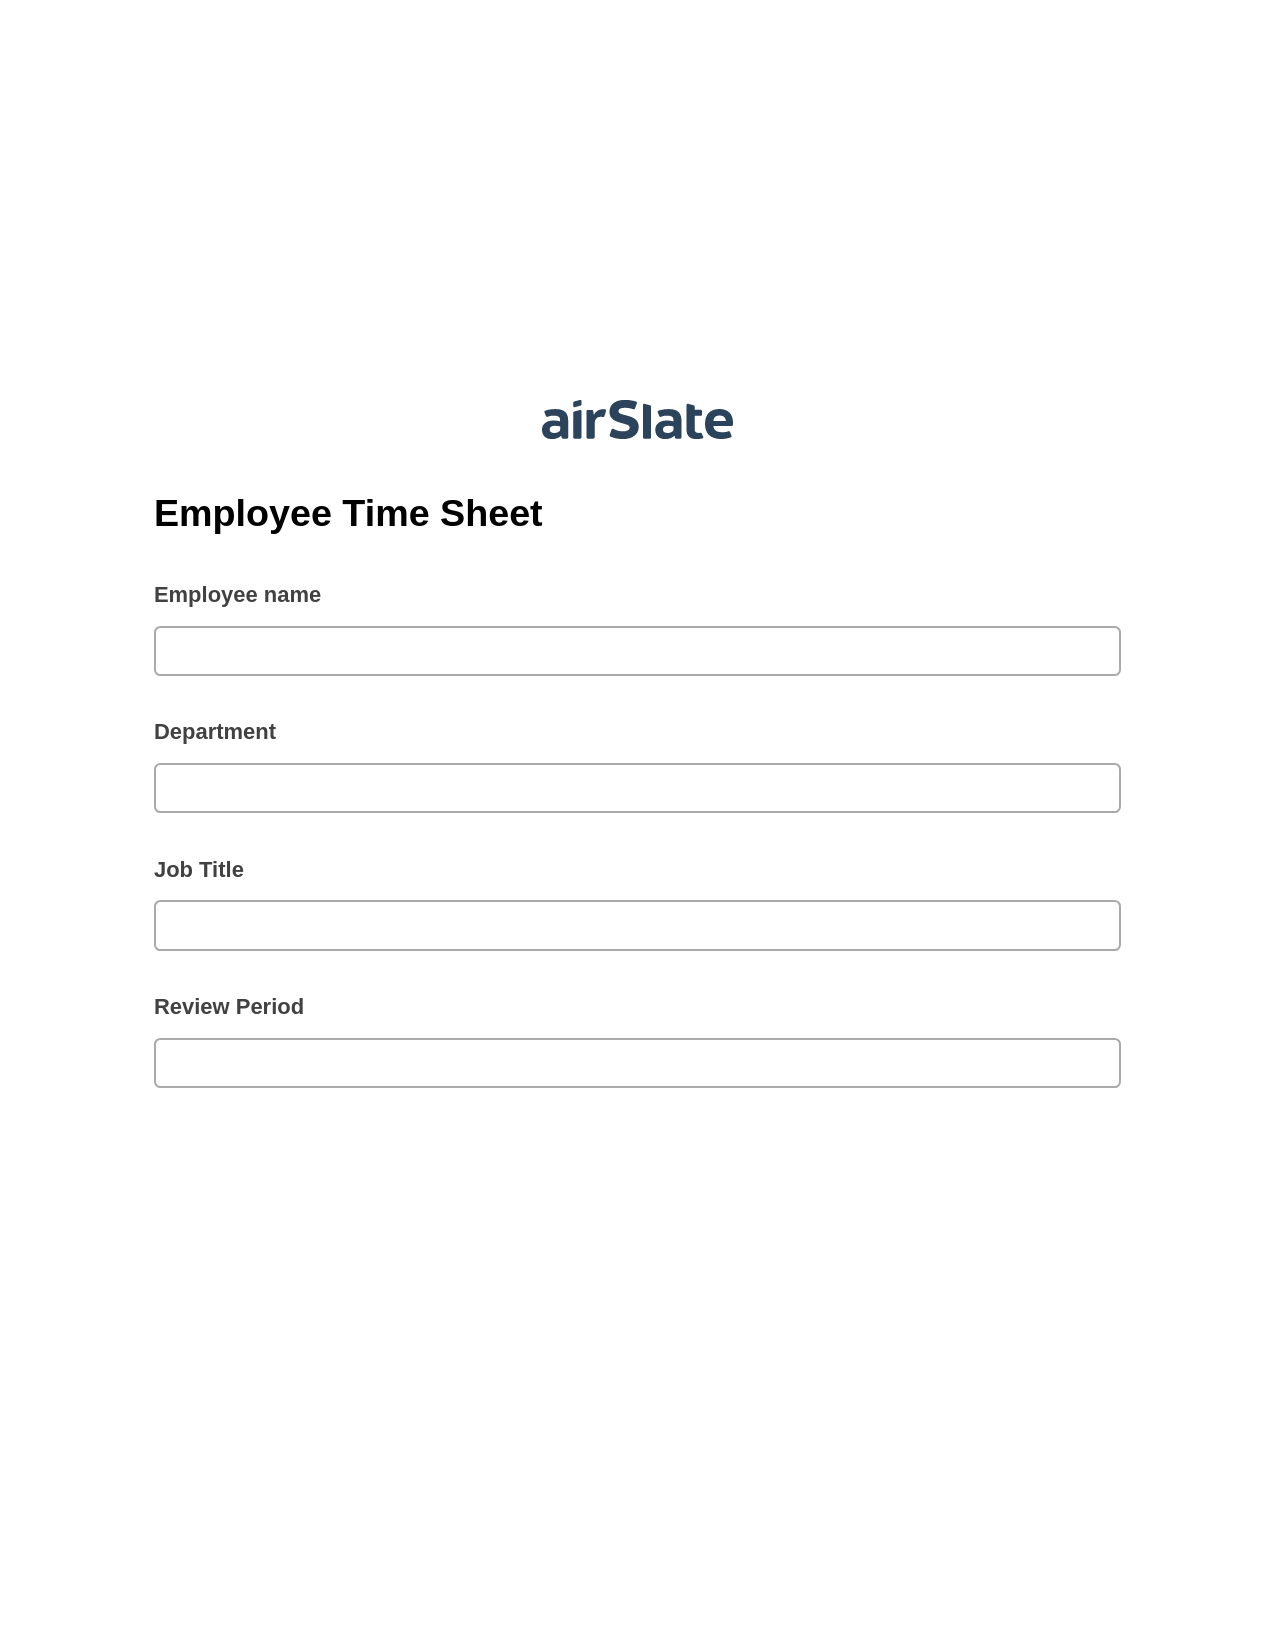 Multirole Employee Time Sheet Pre-fill from MS Dynamics 365 Records, Update Audit Trail Bot, Post-finish Document Bot